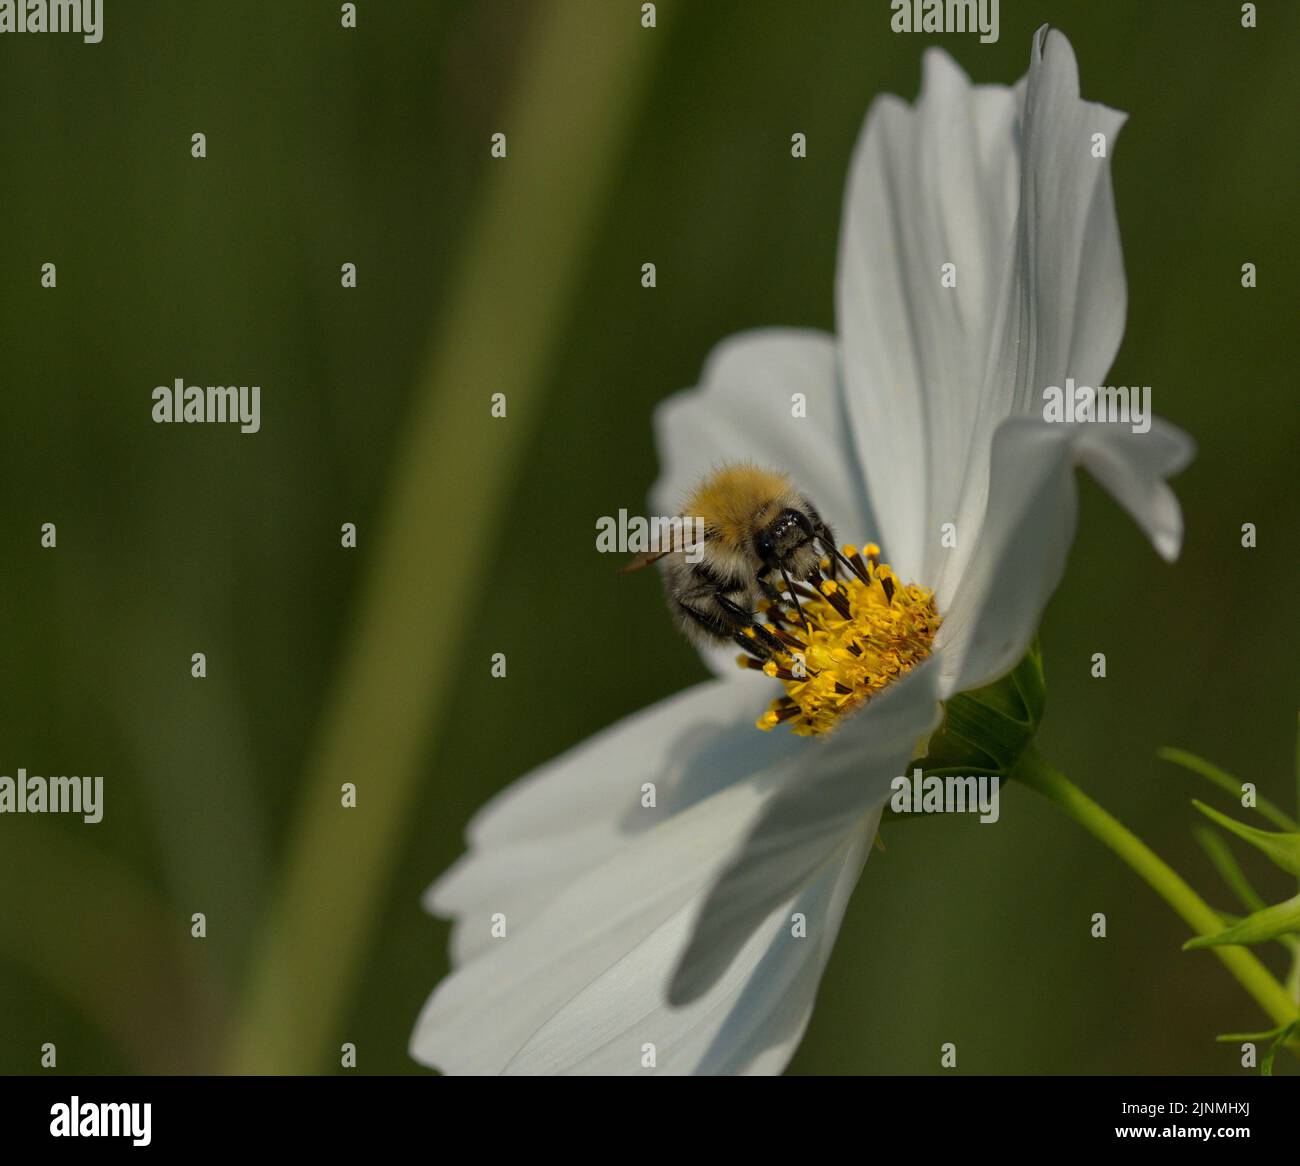 Macor of a bee on a white cosmos flower in summer Stock Photo